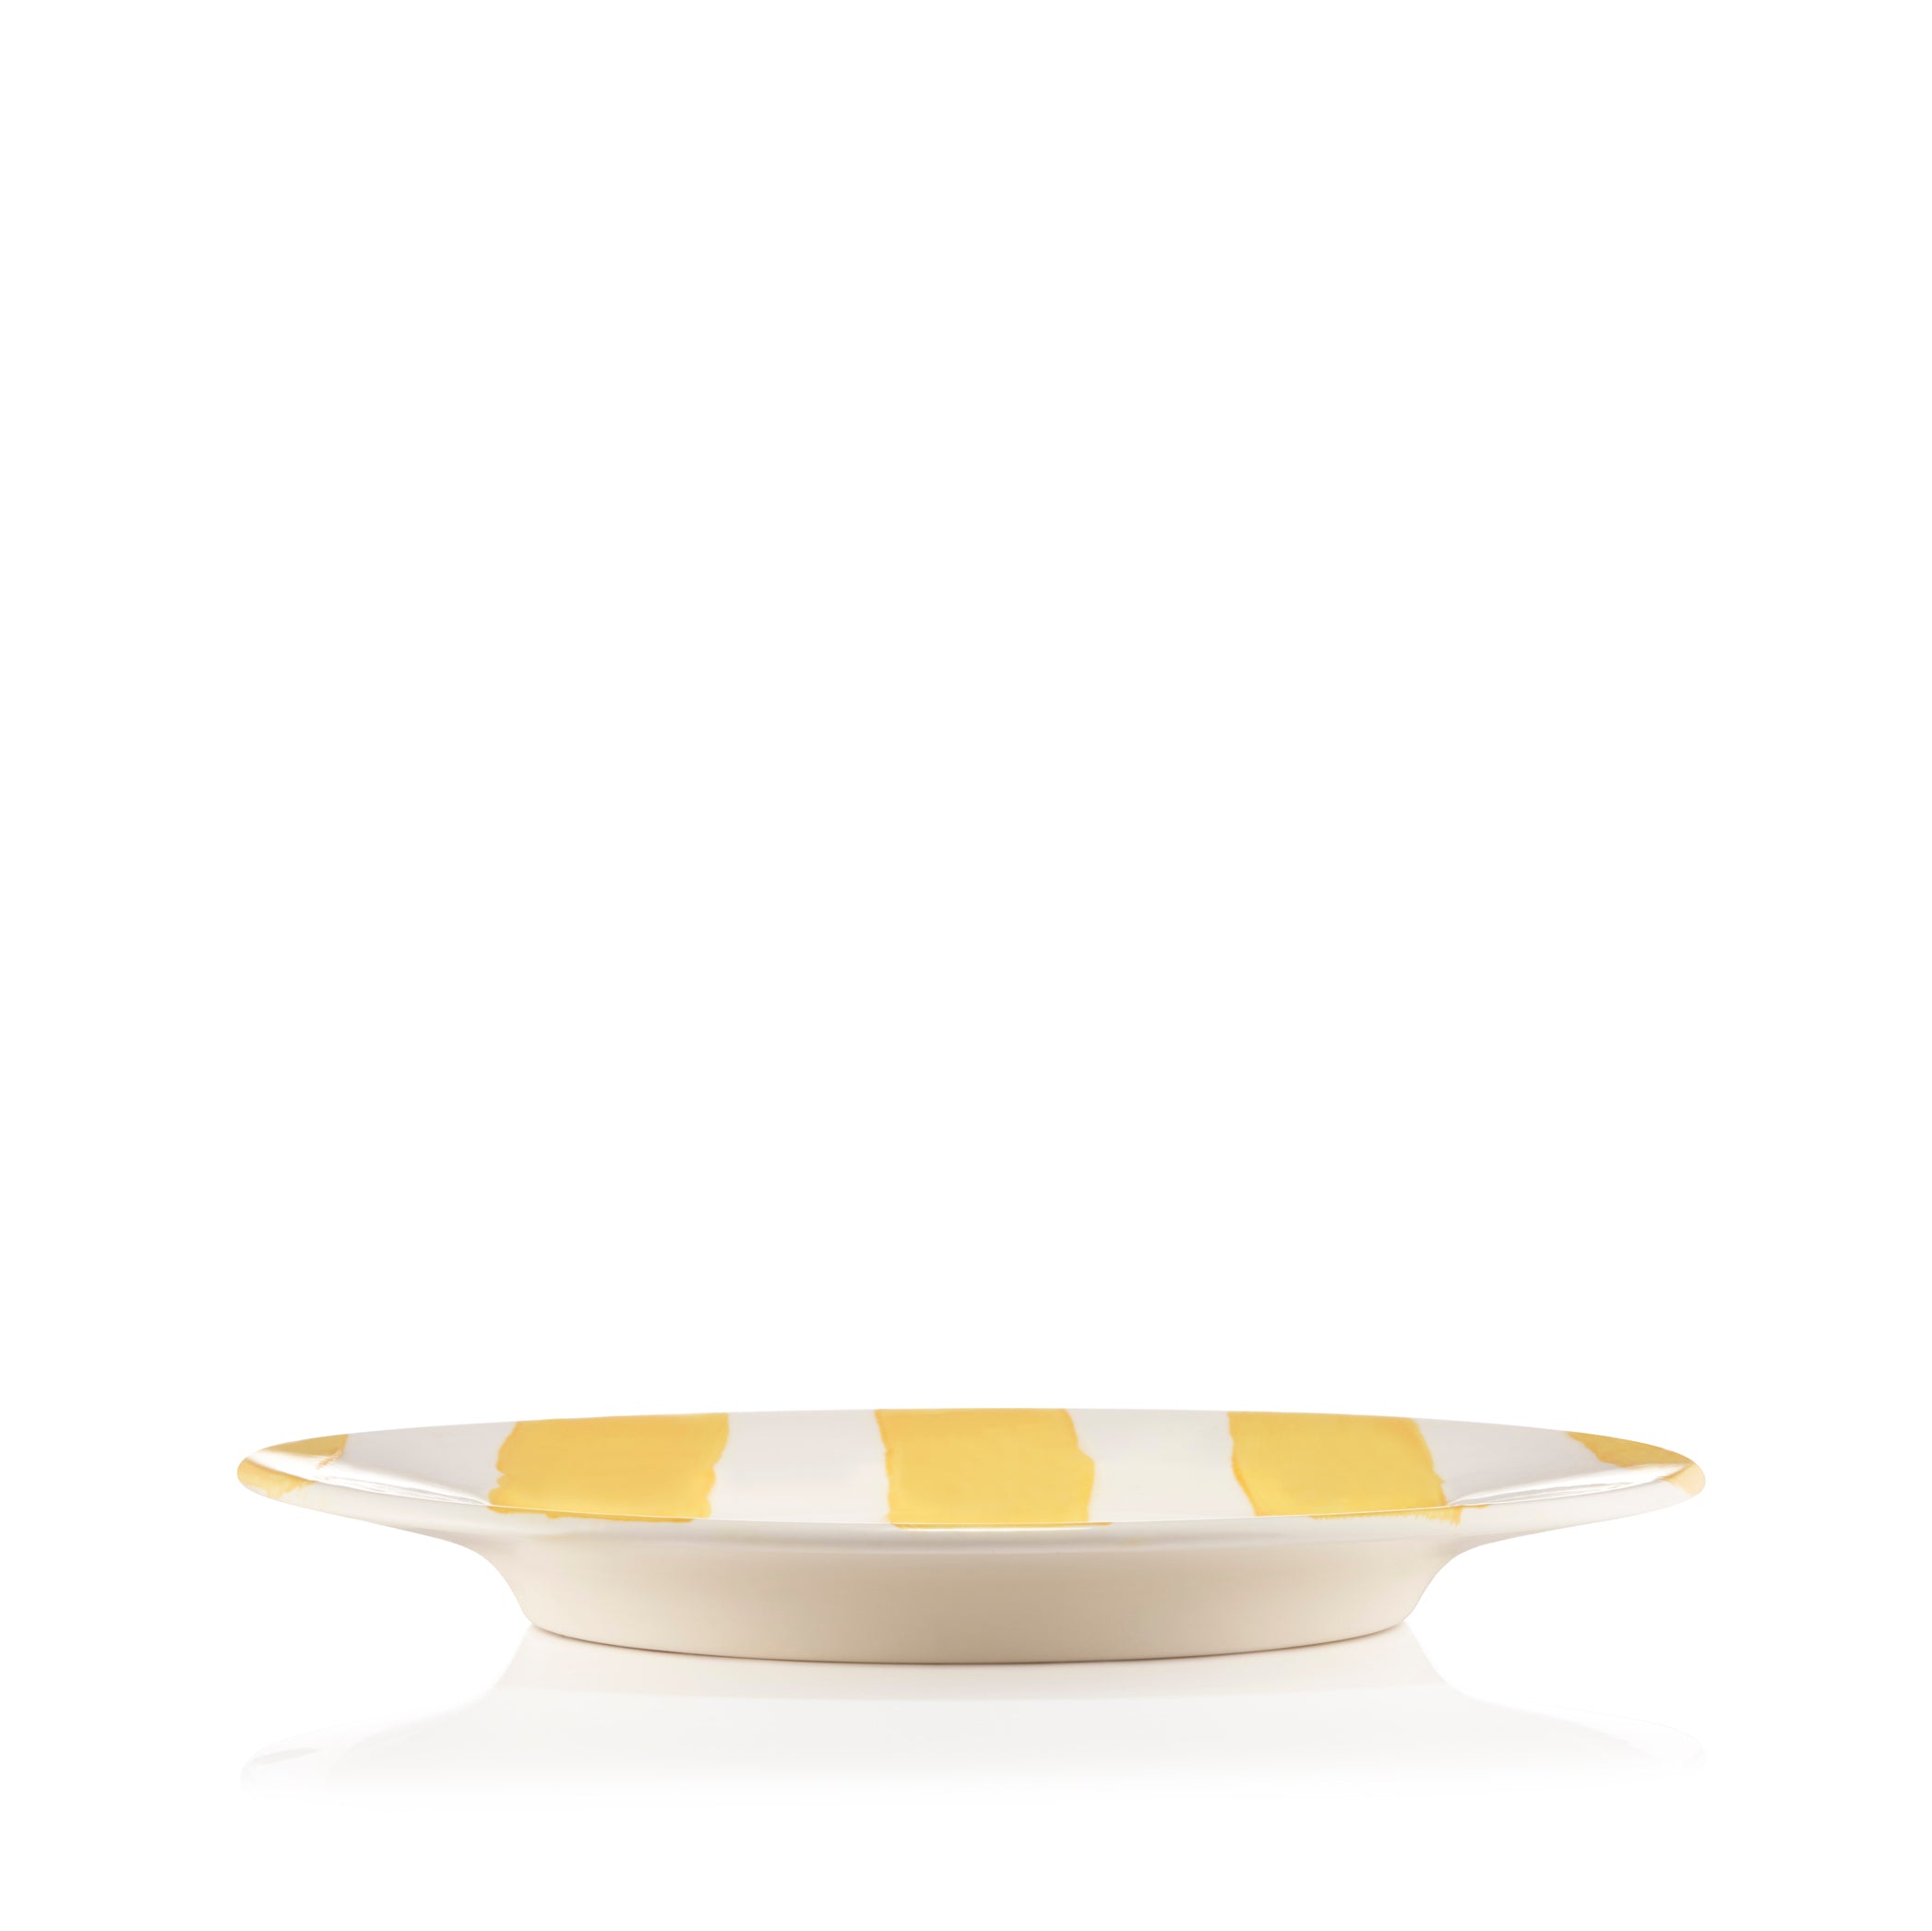 S&B Classic Stripe Side Plate in Yellow and White